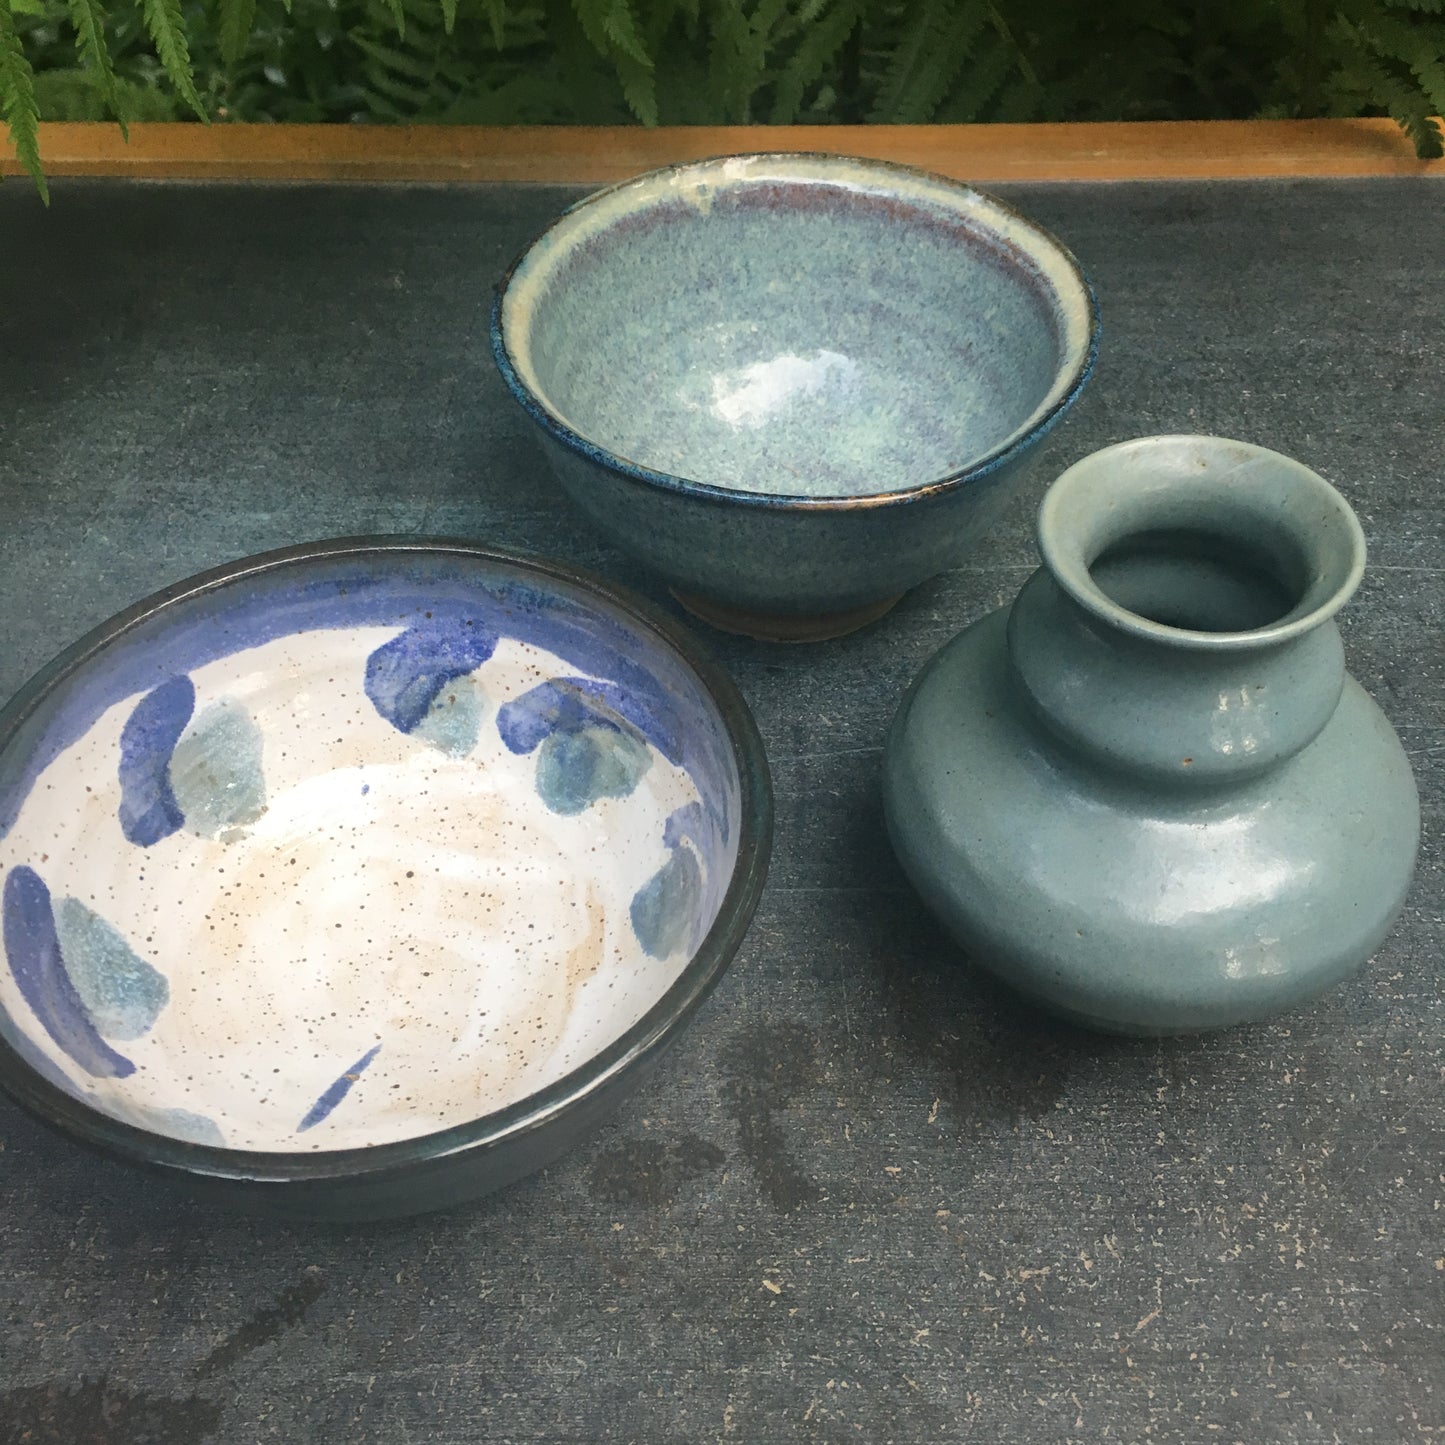 Studio Pottery Lot Vintage Trio of Studio Pottery in shades of blue